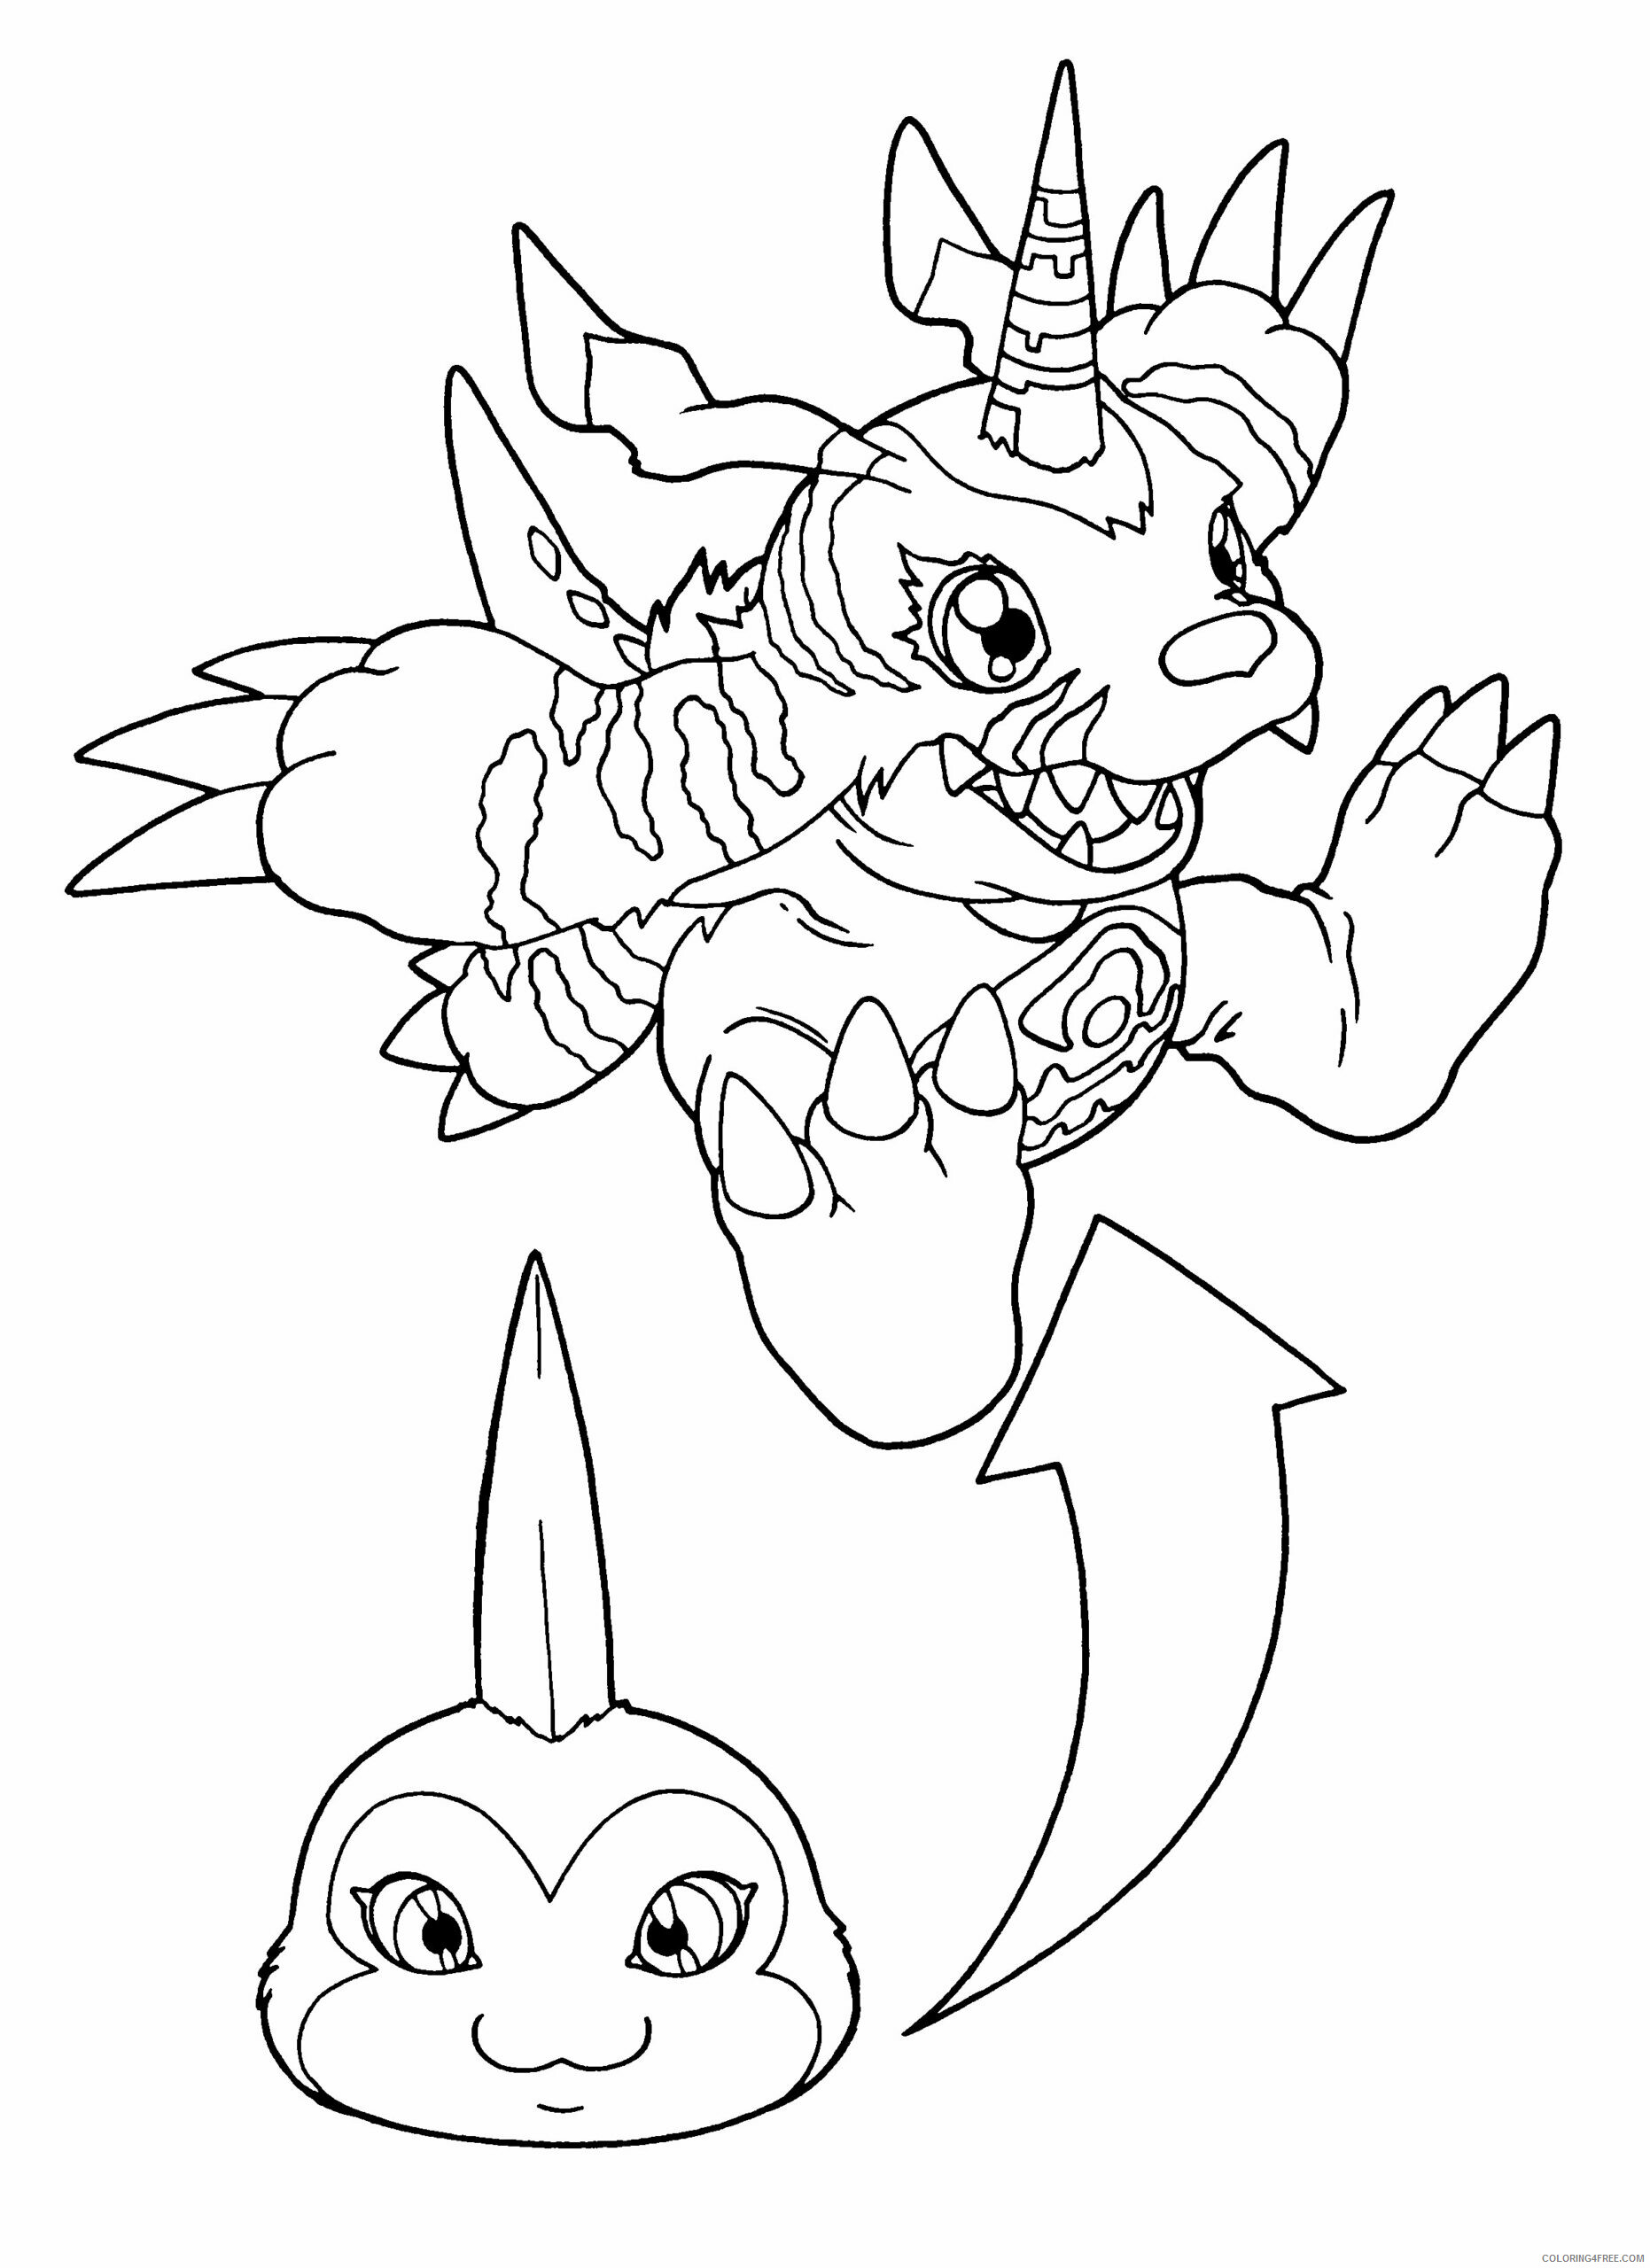 Digimon Printable Coloring Pages Anime digimon 95 2021 0392 Coloring4free